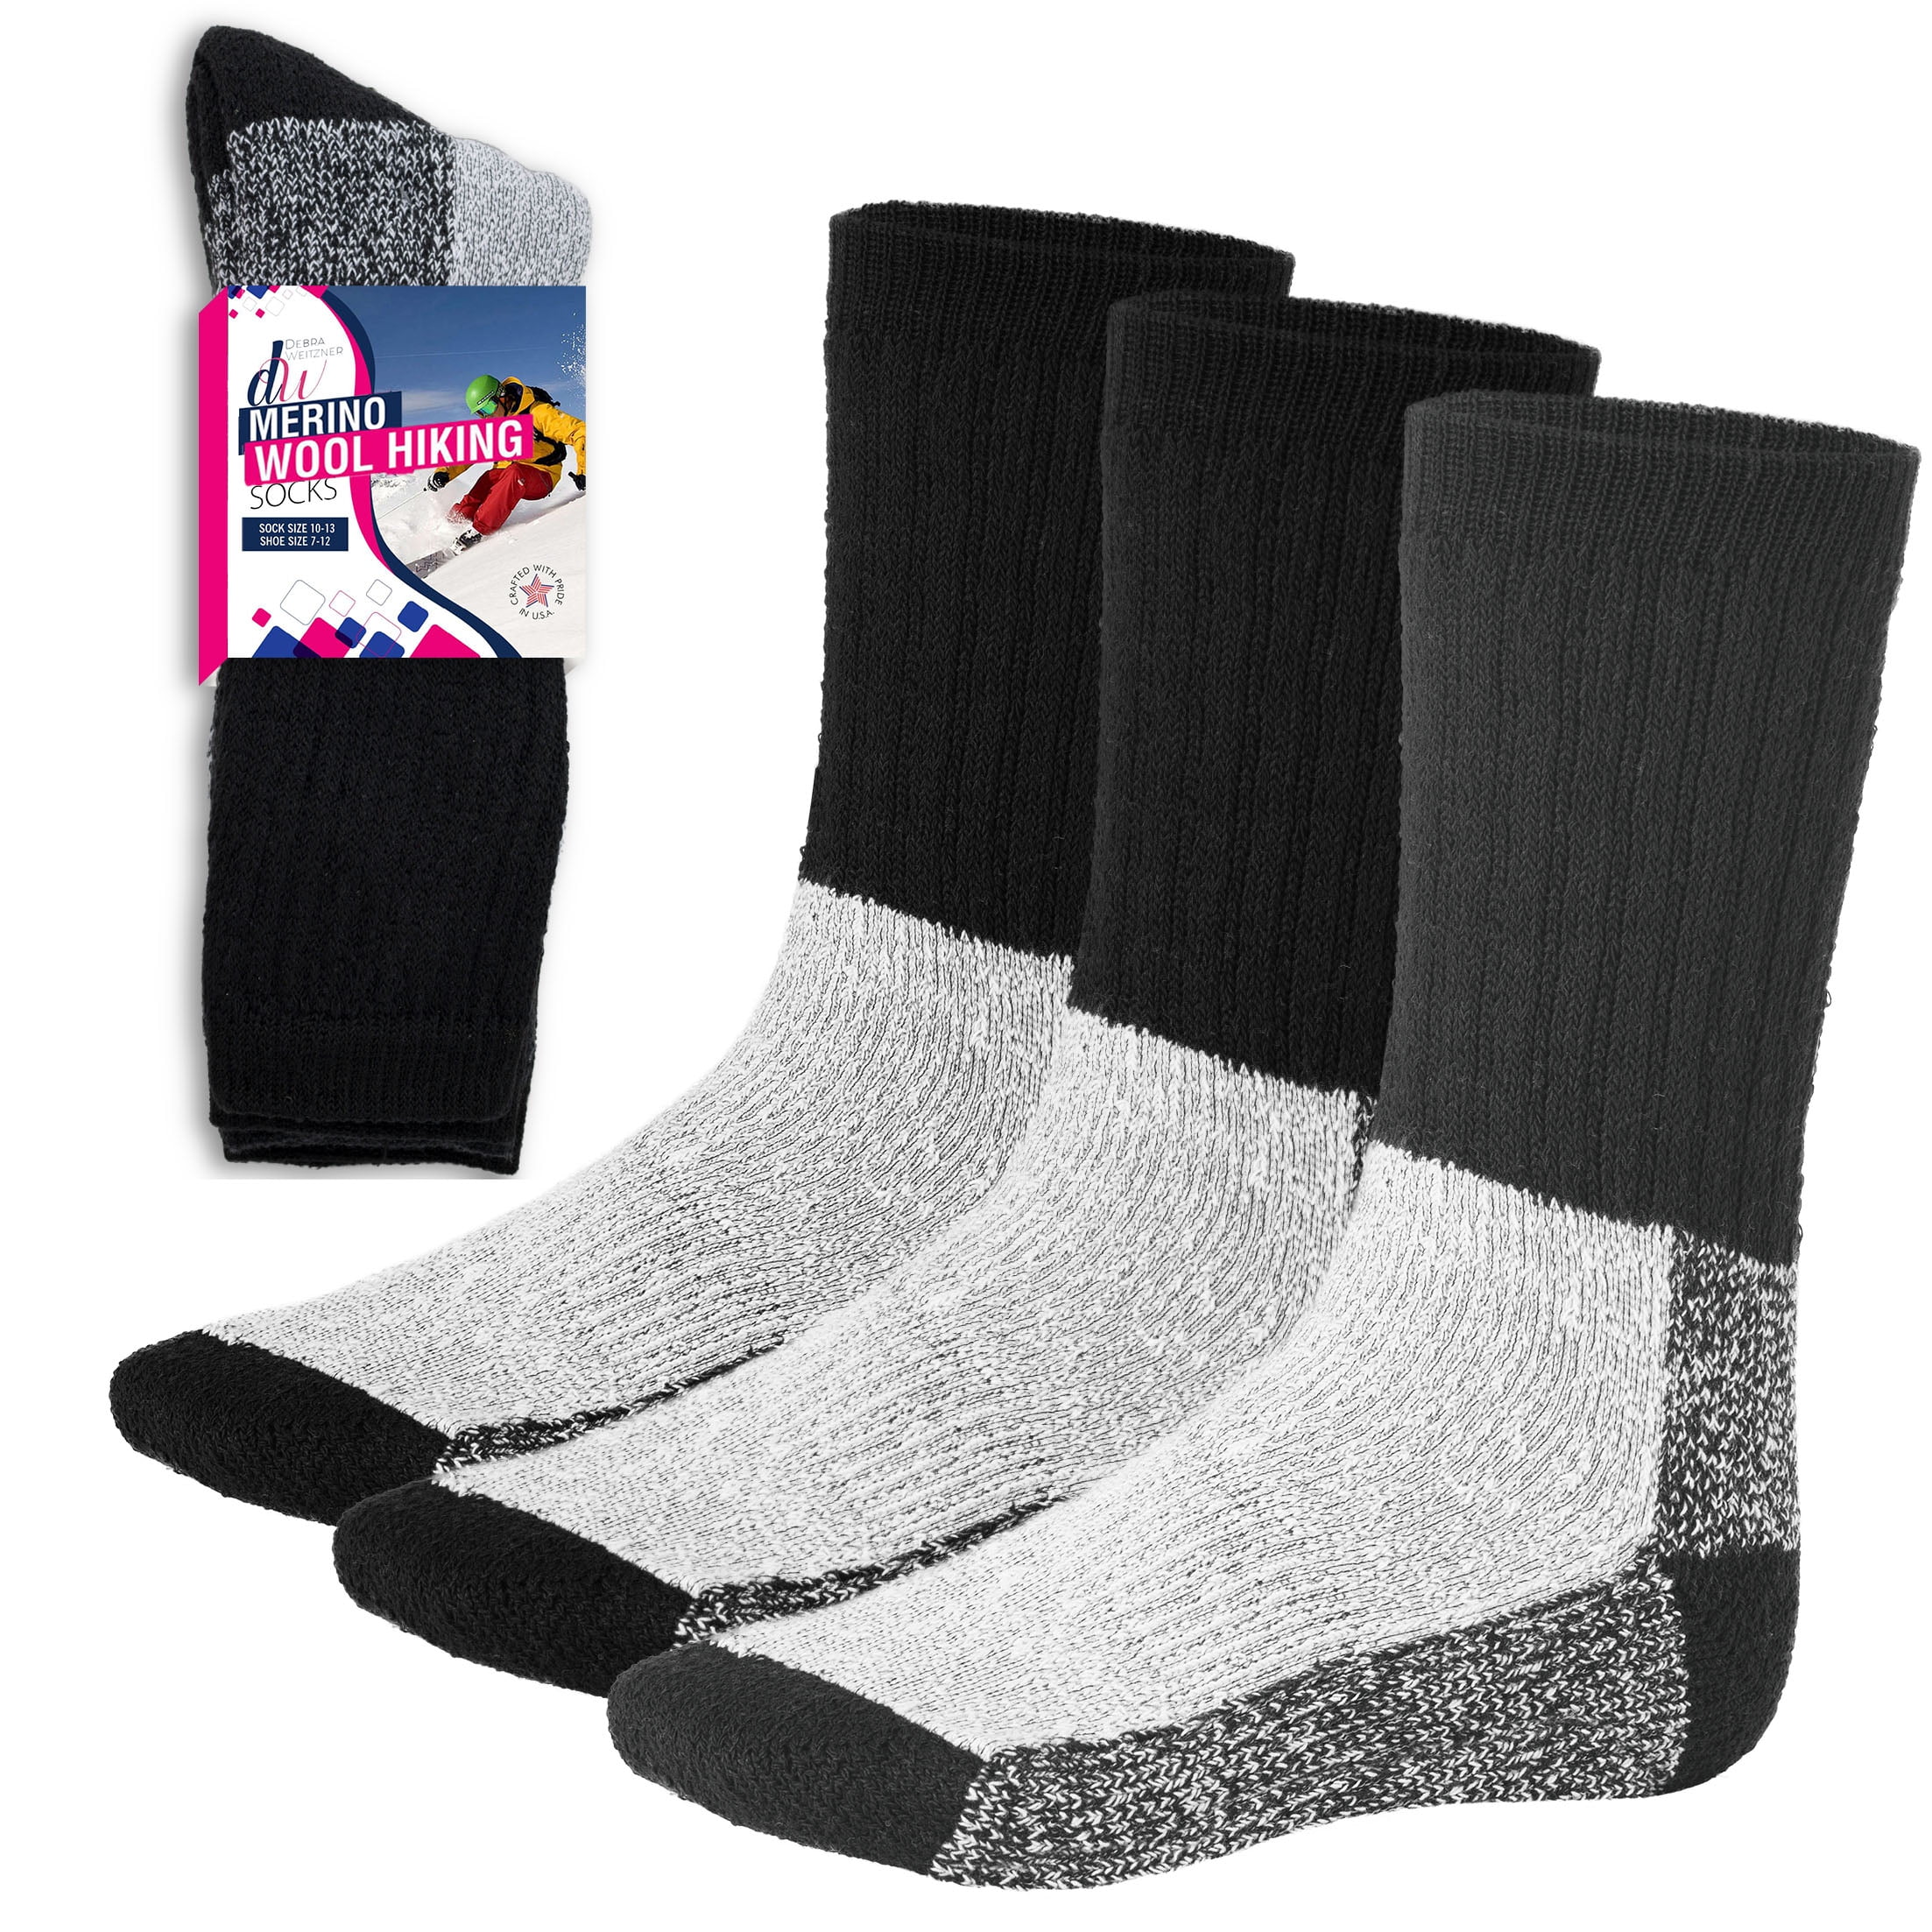 3 Pairs Mens Heated SOX Extra Thick Work Winter Heavy Duty Warm Thermal Socks 